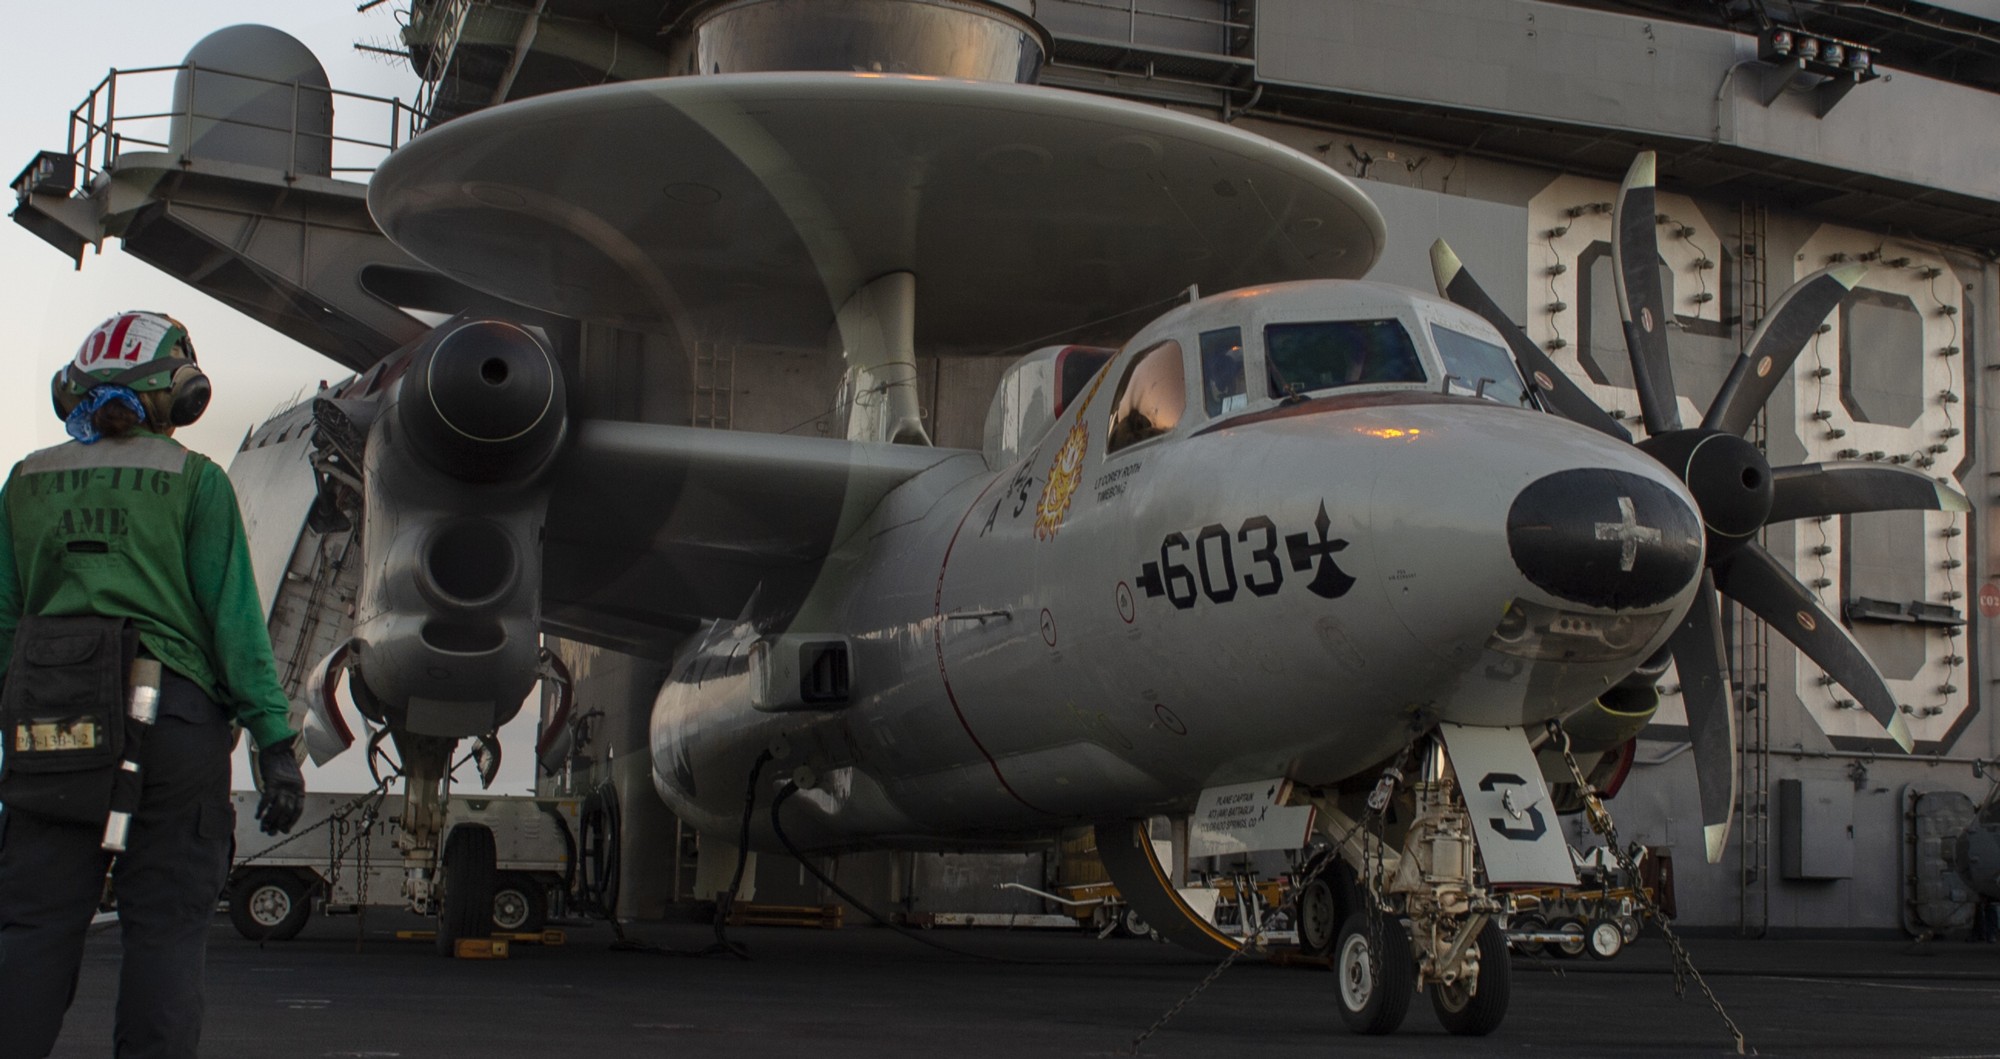 vaw-116 sun kings airborne command control squadron carrier early warning cvw-17 uss nimitz cvn-68 101